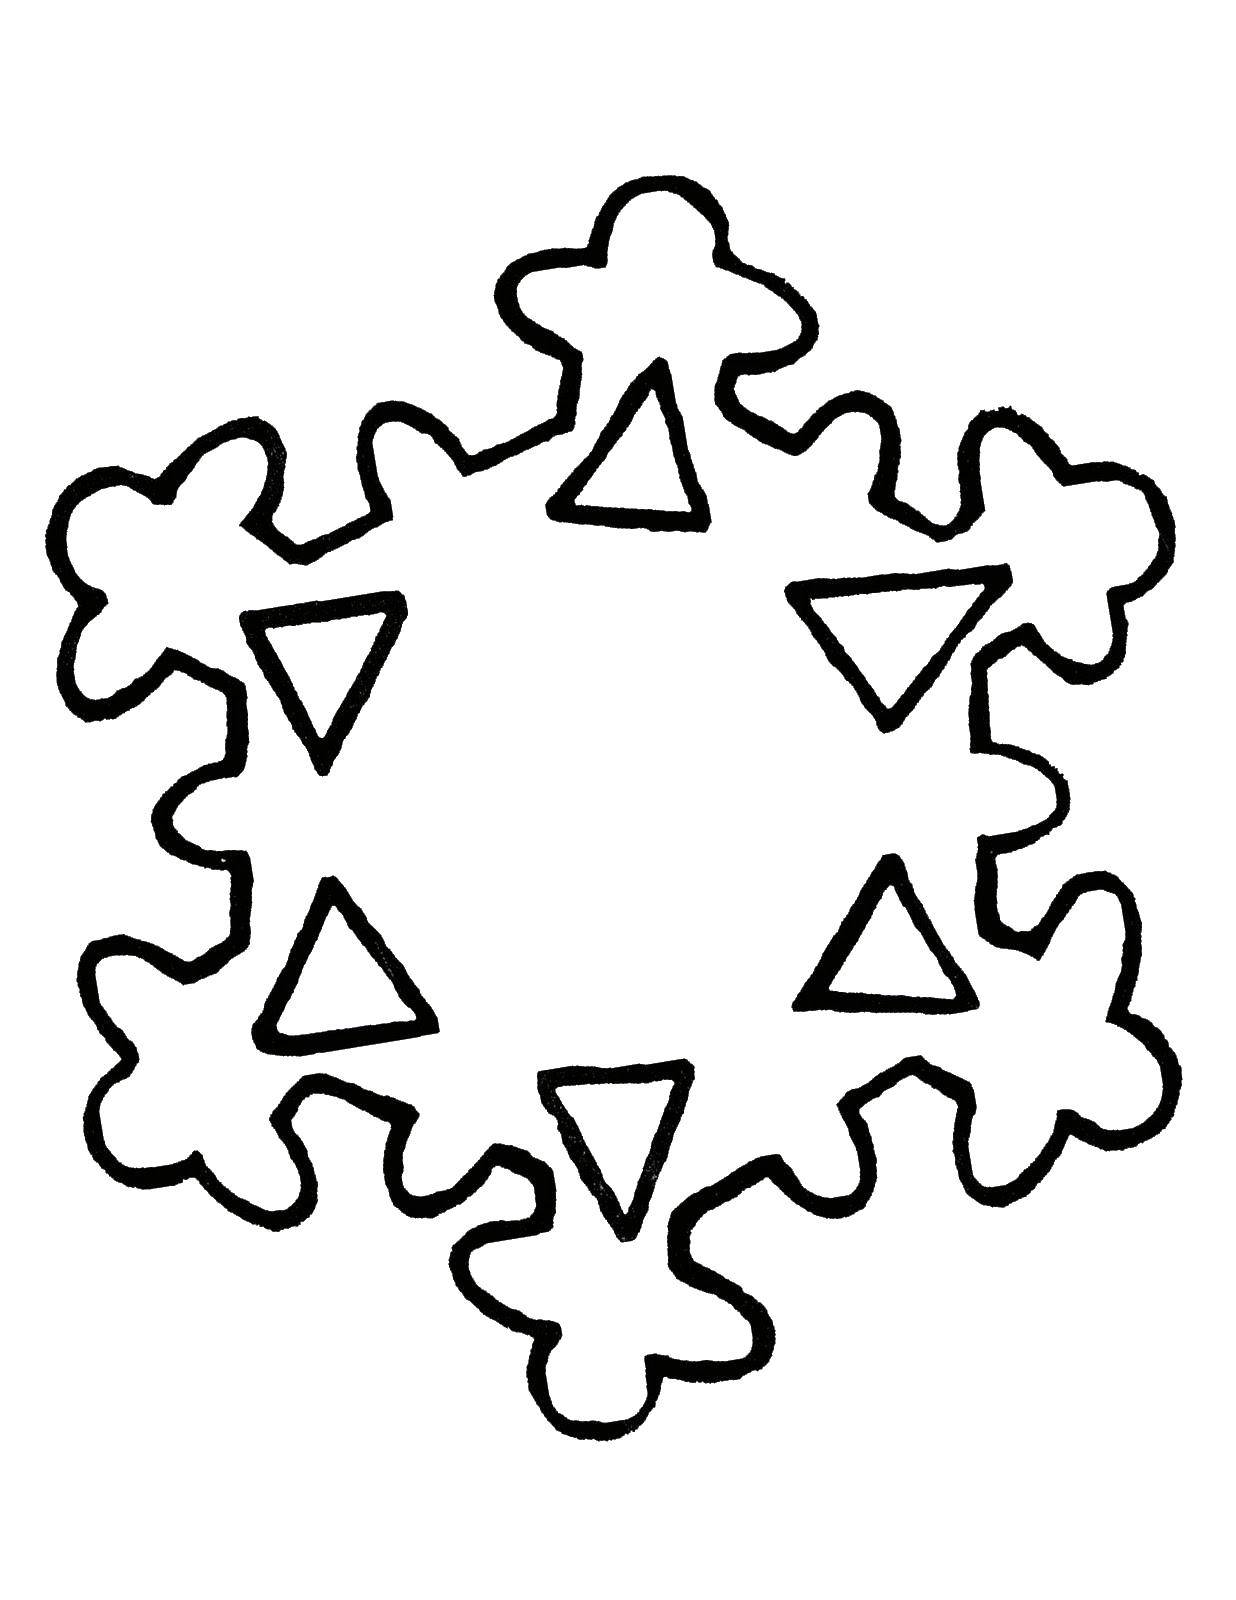 Coloring Volume snowflake. Category The contour snowflakes. Tags:  Snowflakes, snow, winter.